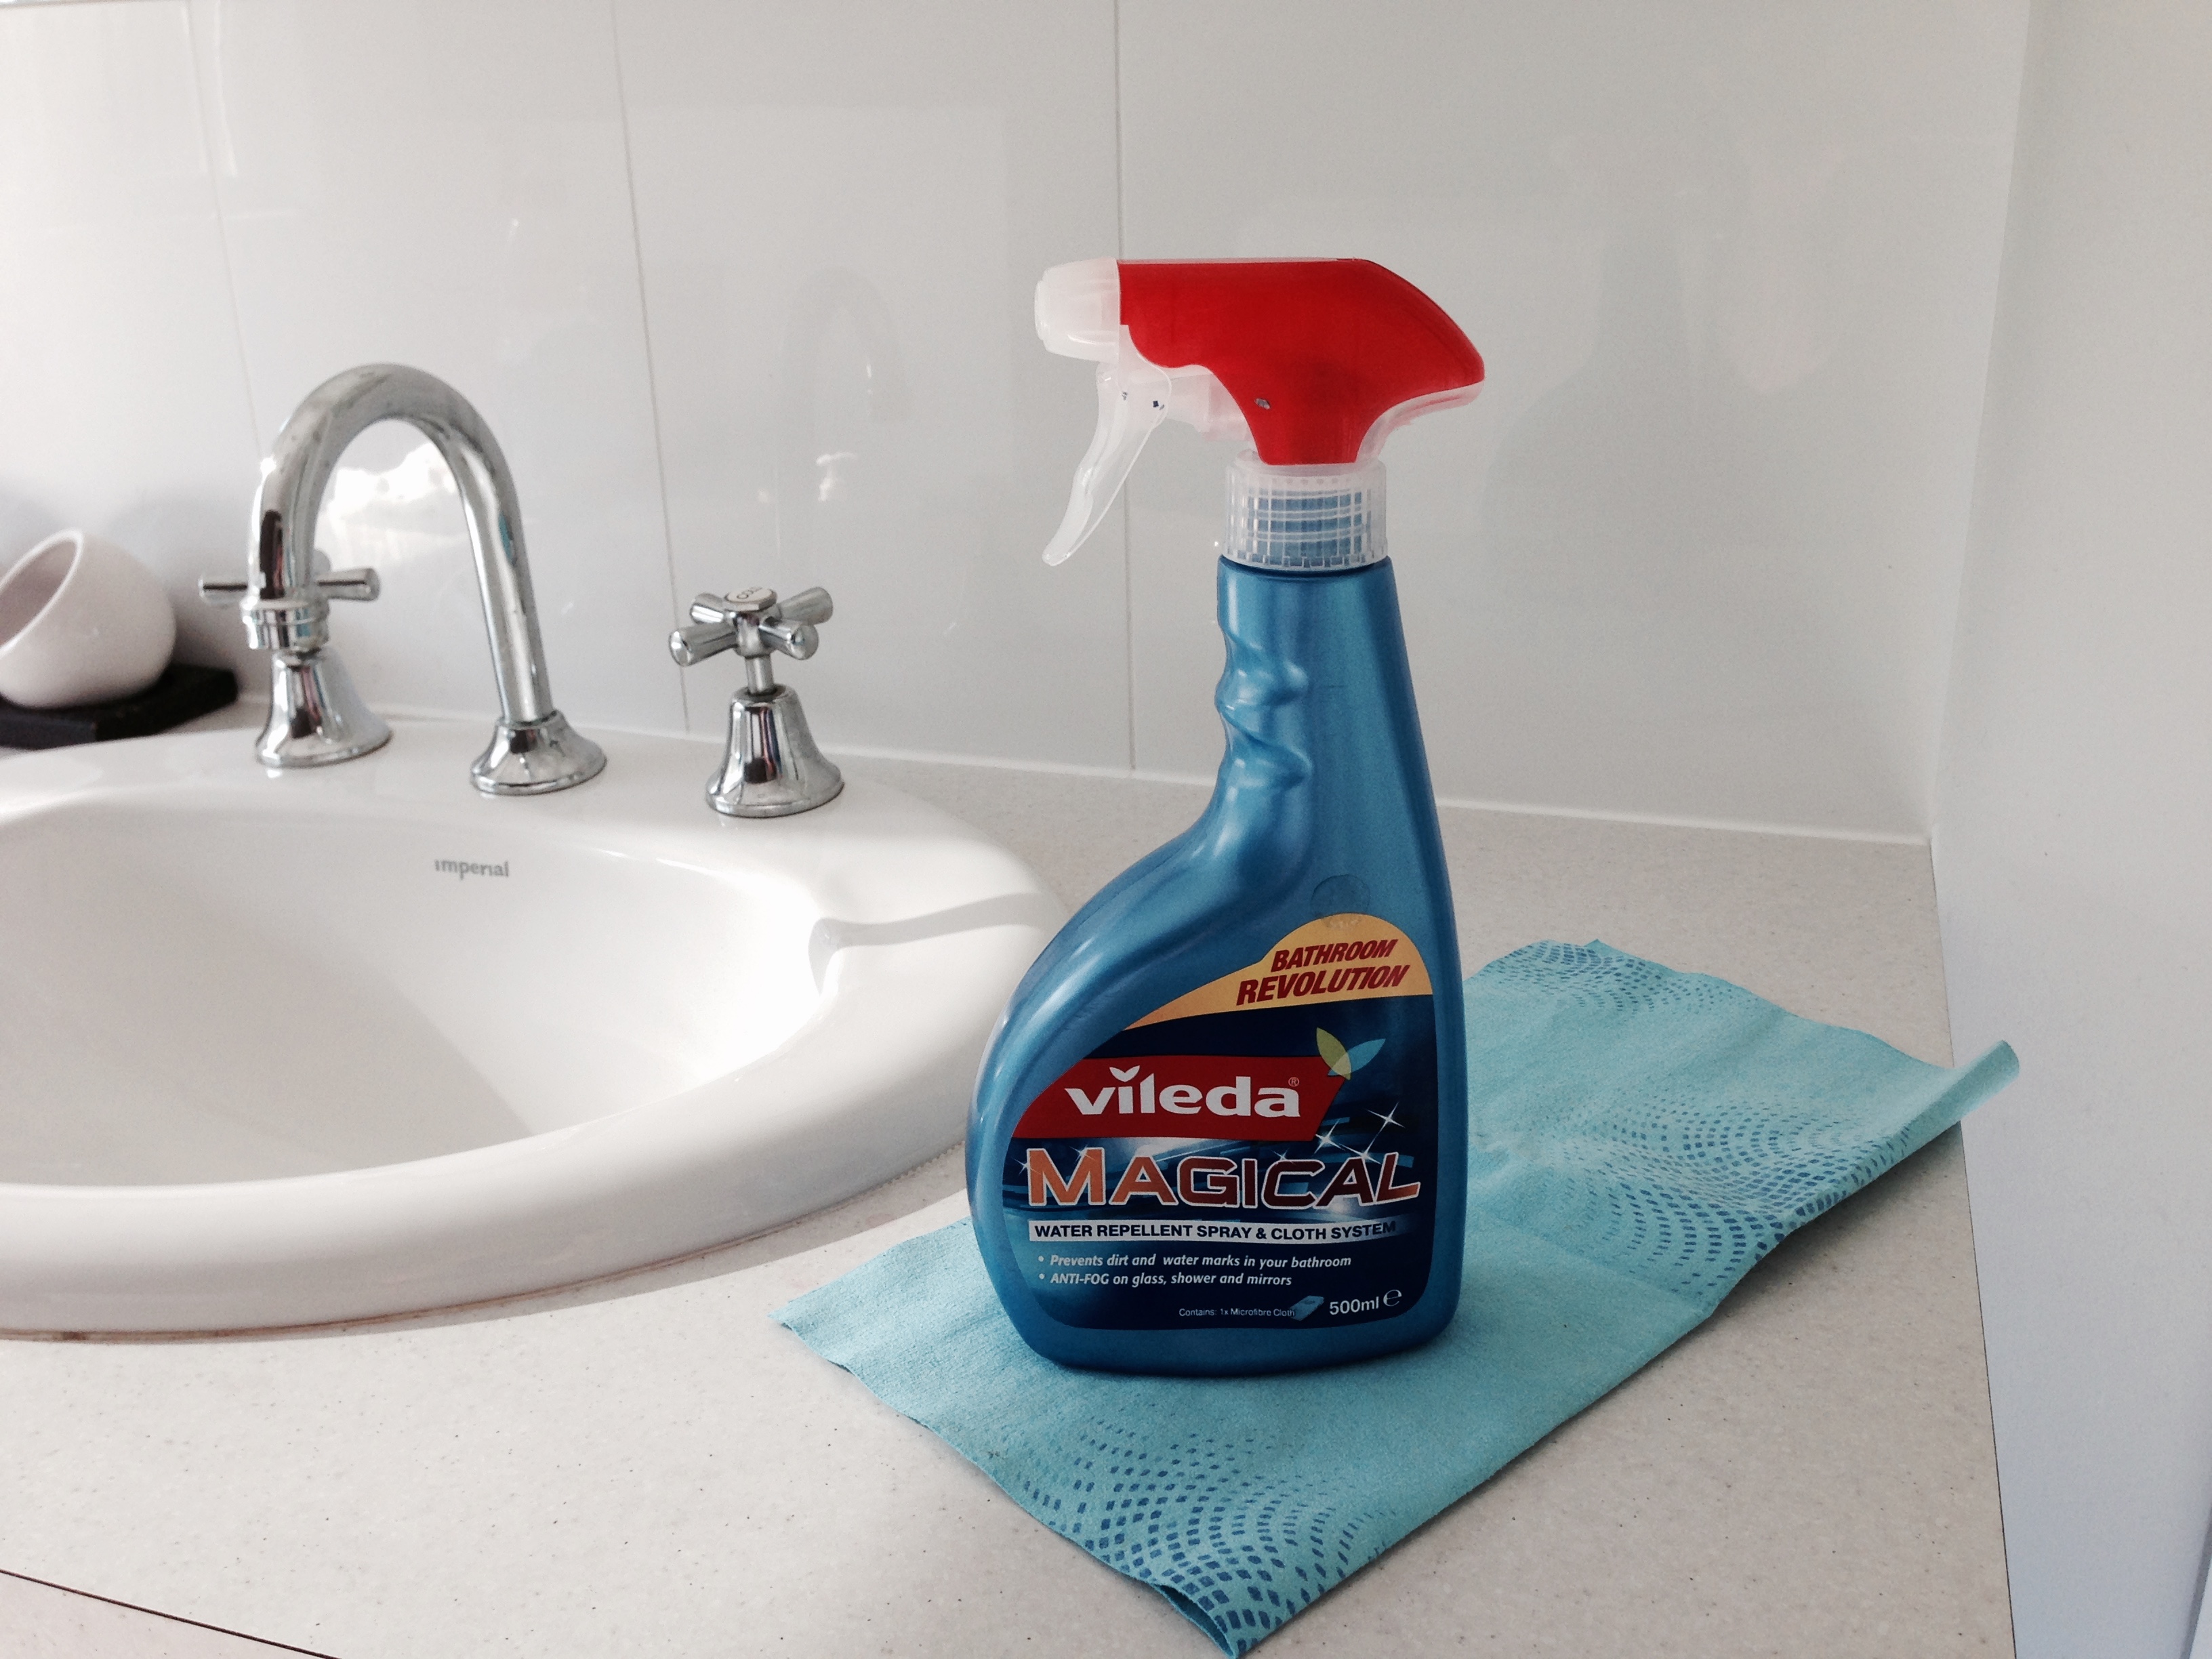 How to keep your shower screens clean - Vileda Magical Review